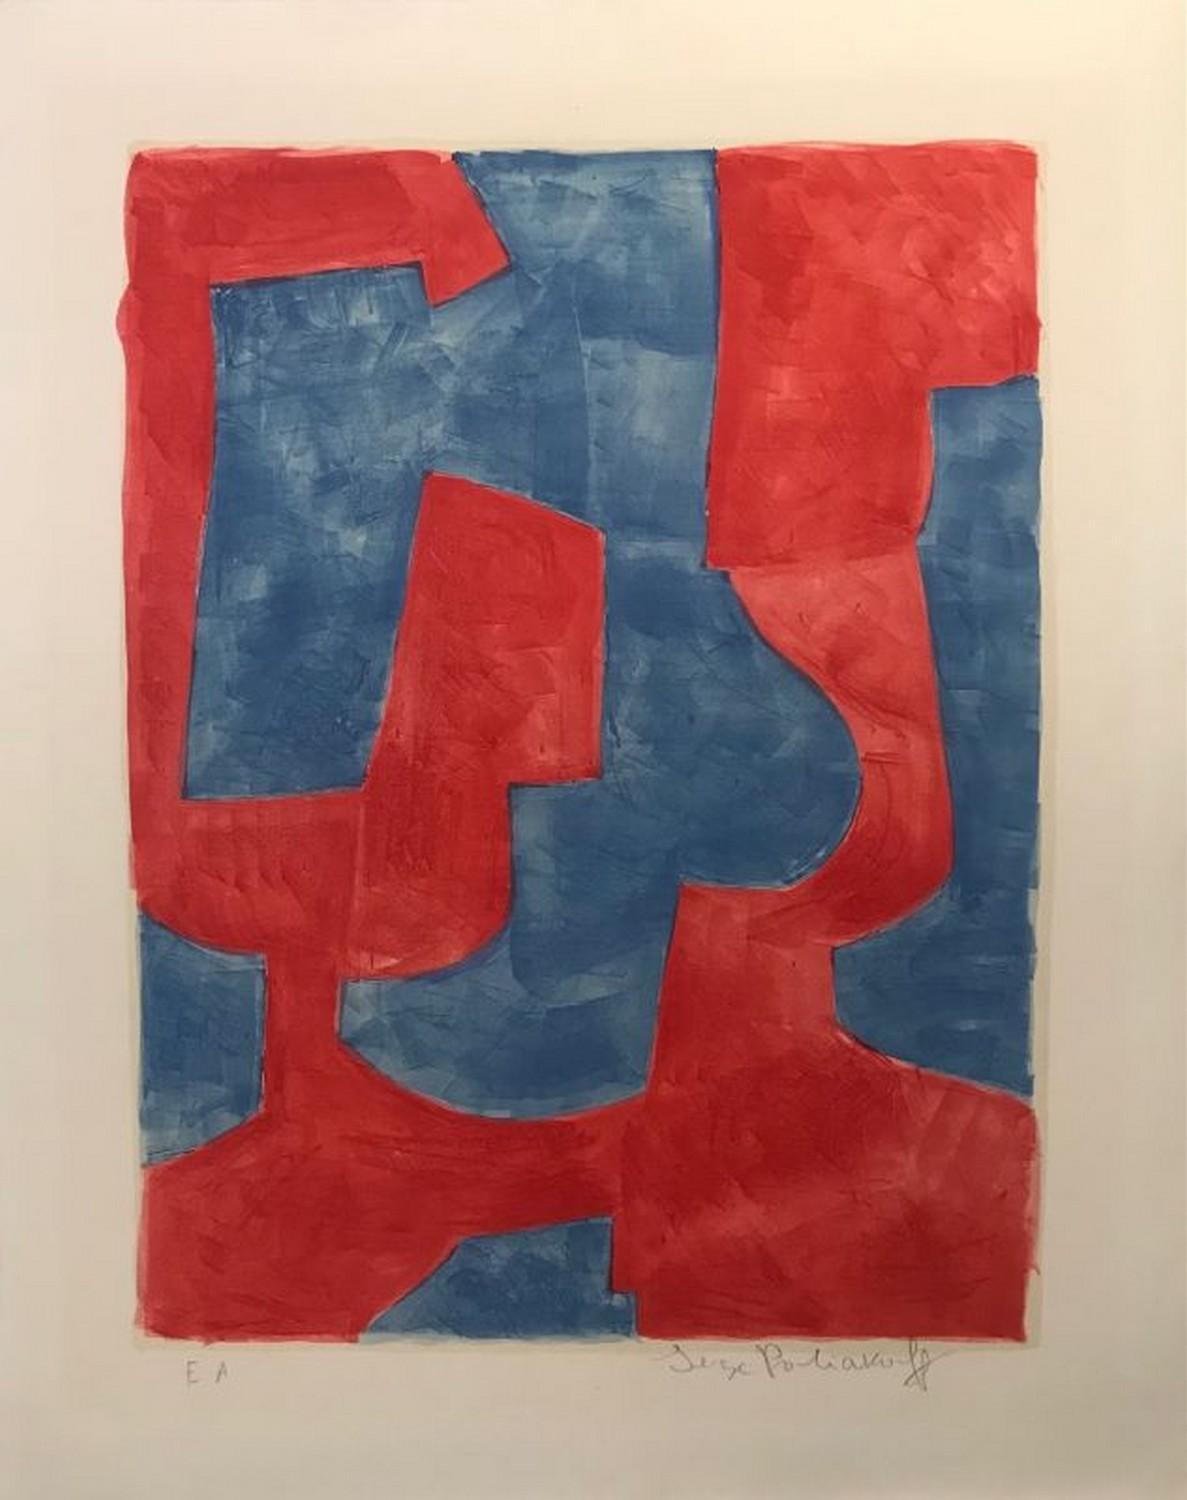 Serge Poliakoff Abstract Print - Composition bleue et rouge L57 